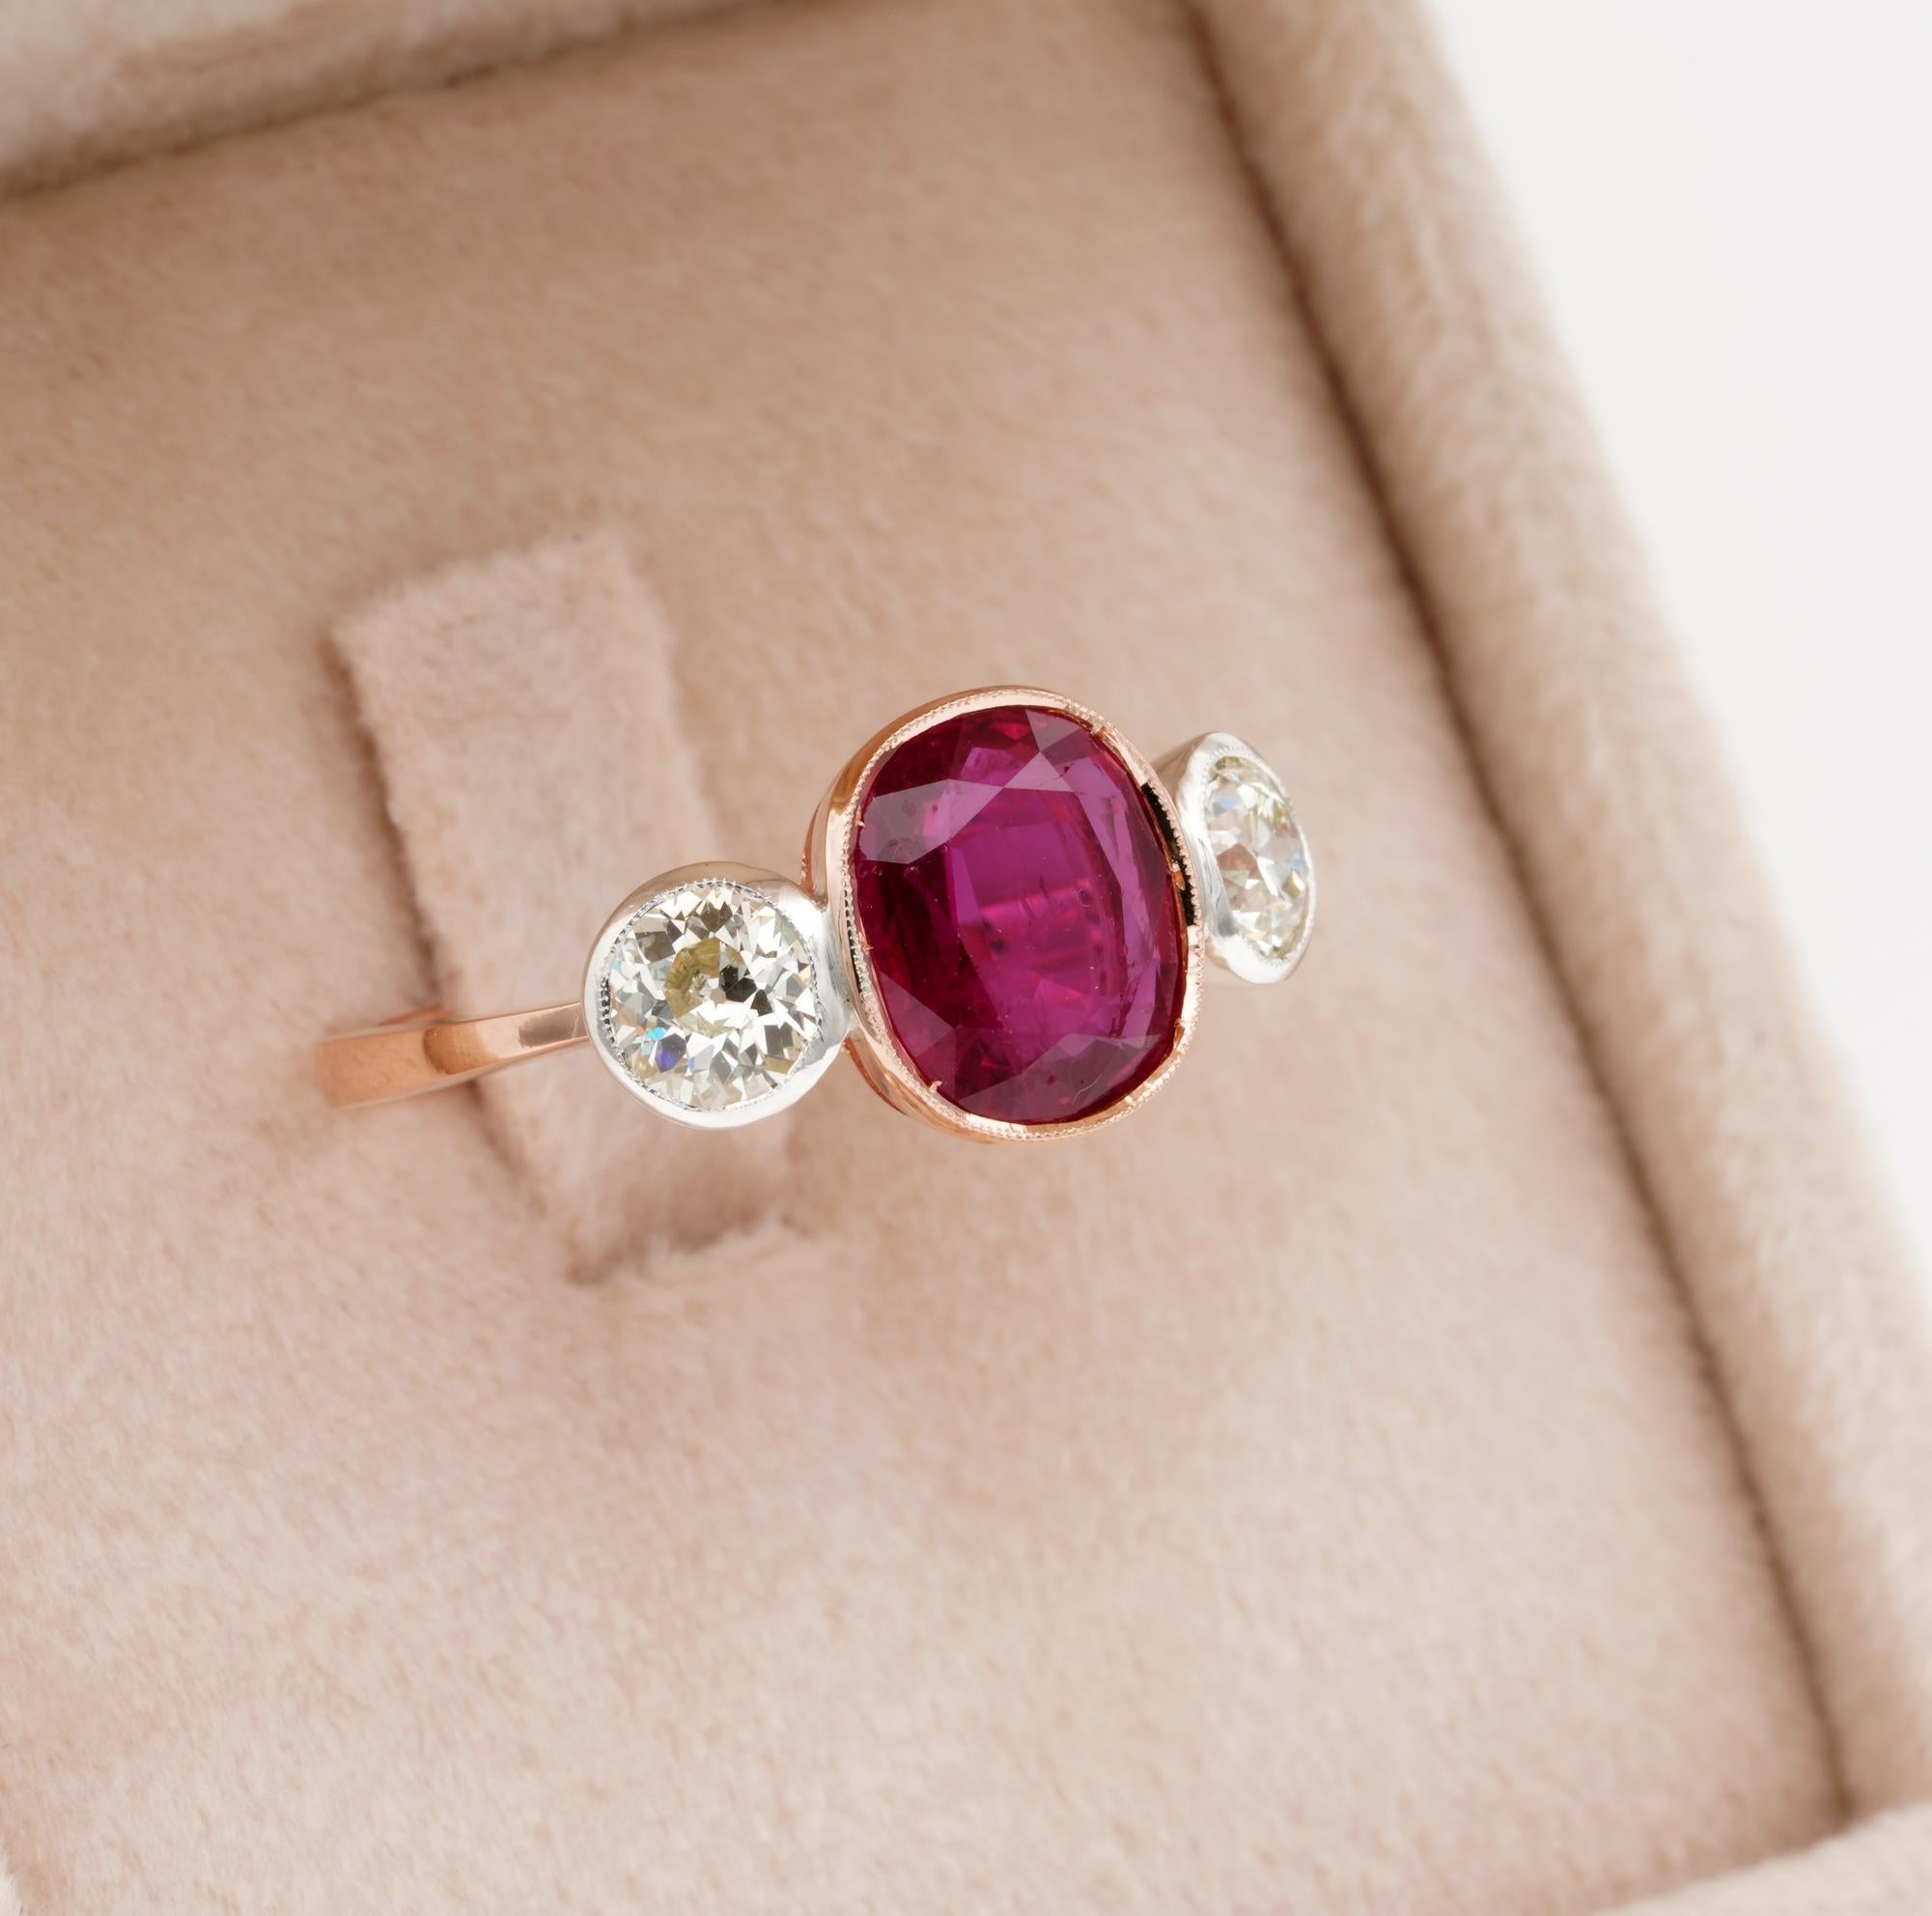 The Gemstone of Romance

An Art Deco Diamond and Ruby three stone ring elegantly crafted of solid 18 KT rose gold
Set to the centre with a beautiful and rare to achieve Natural No Heat Siam Ruby very desirable red colour, vibrant red and large oval